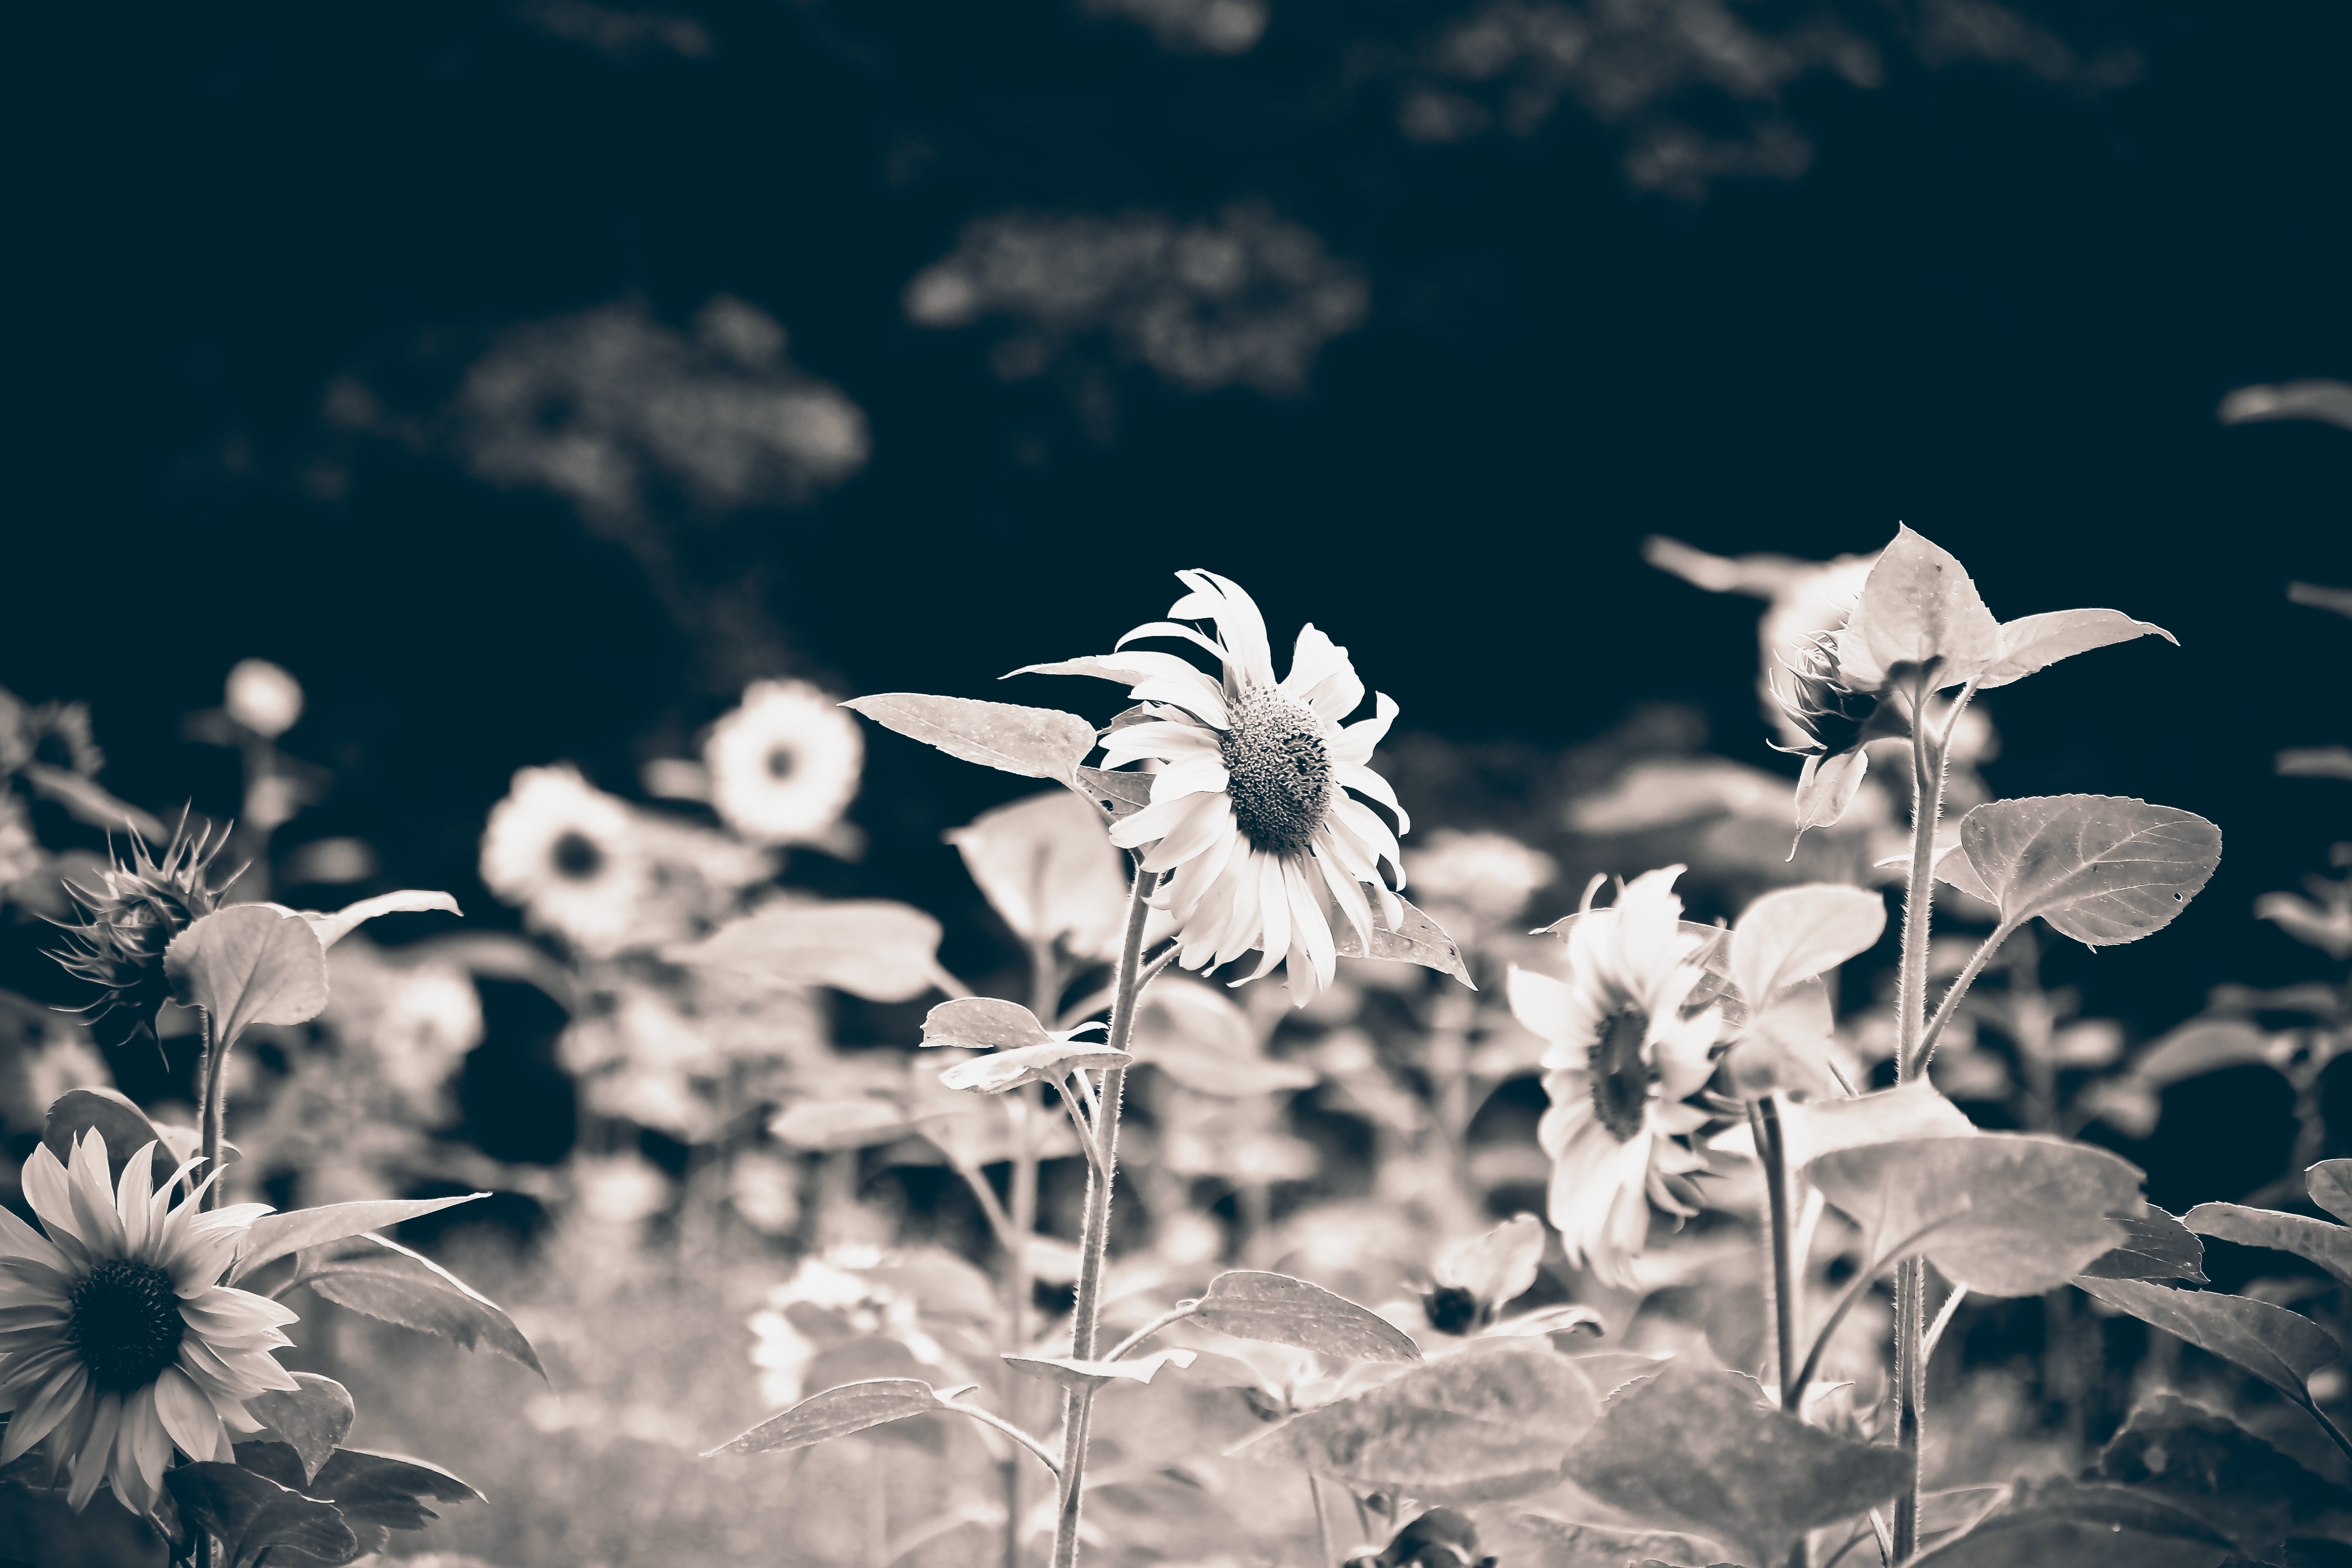 sunflower in grayscale photo